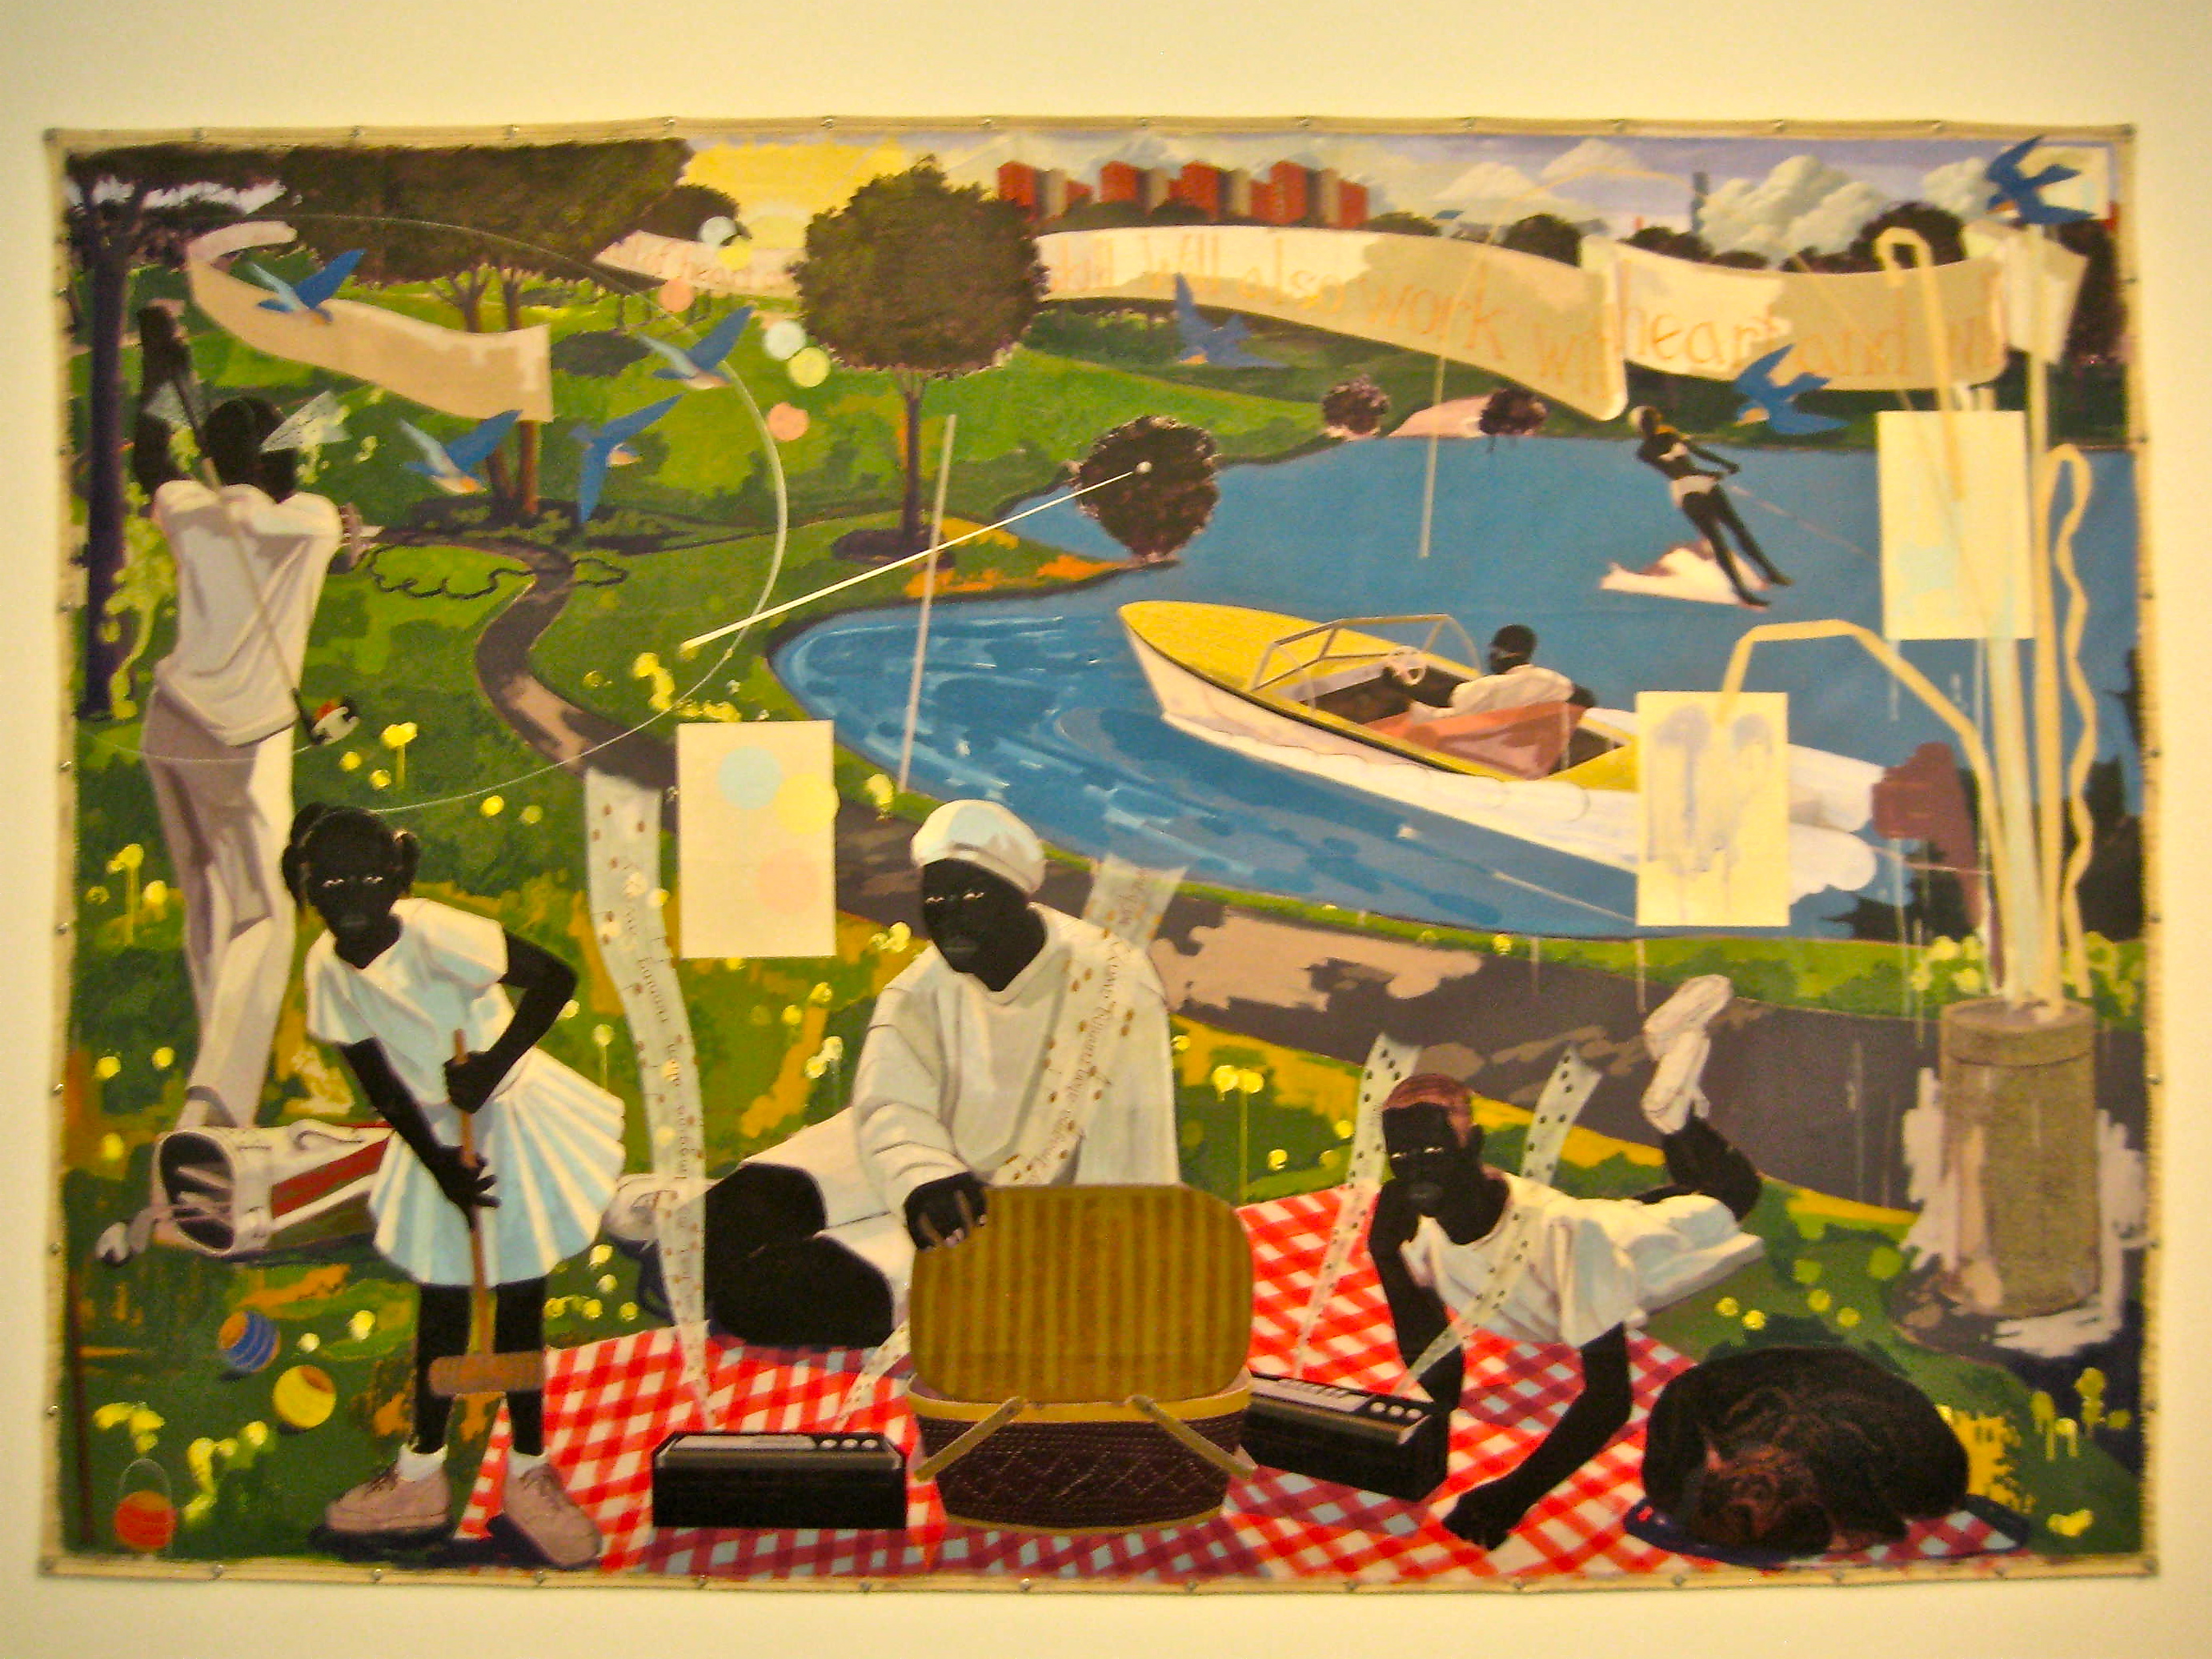 Glimpse of solace: Kerry James Marshall at MCA | Solace in a Book